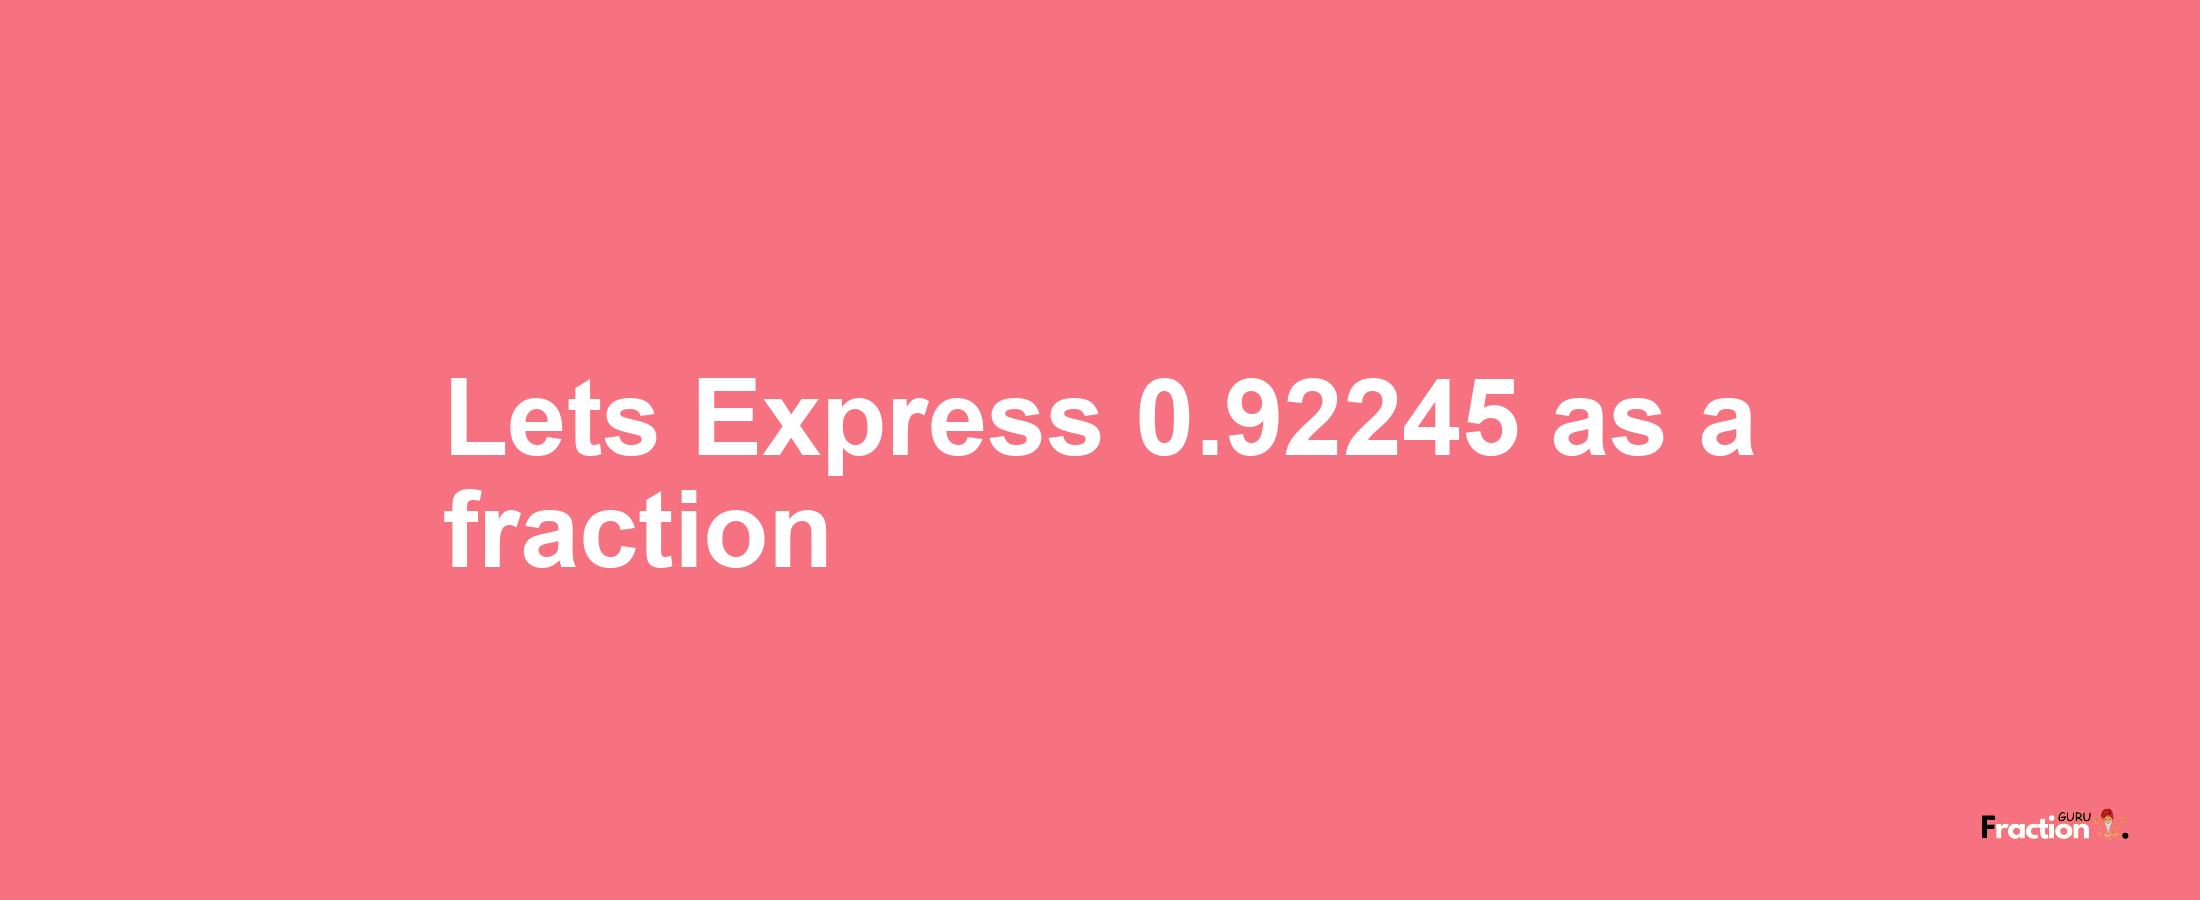 Lets Express 0.92245 as afraction